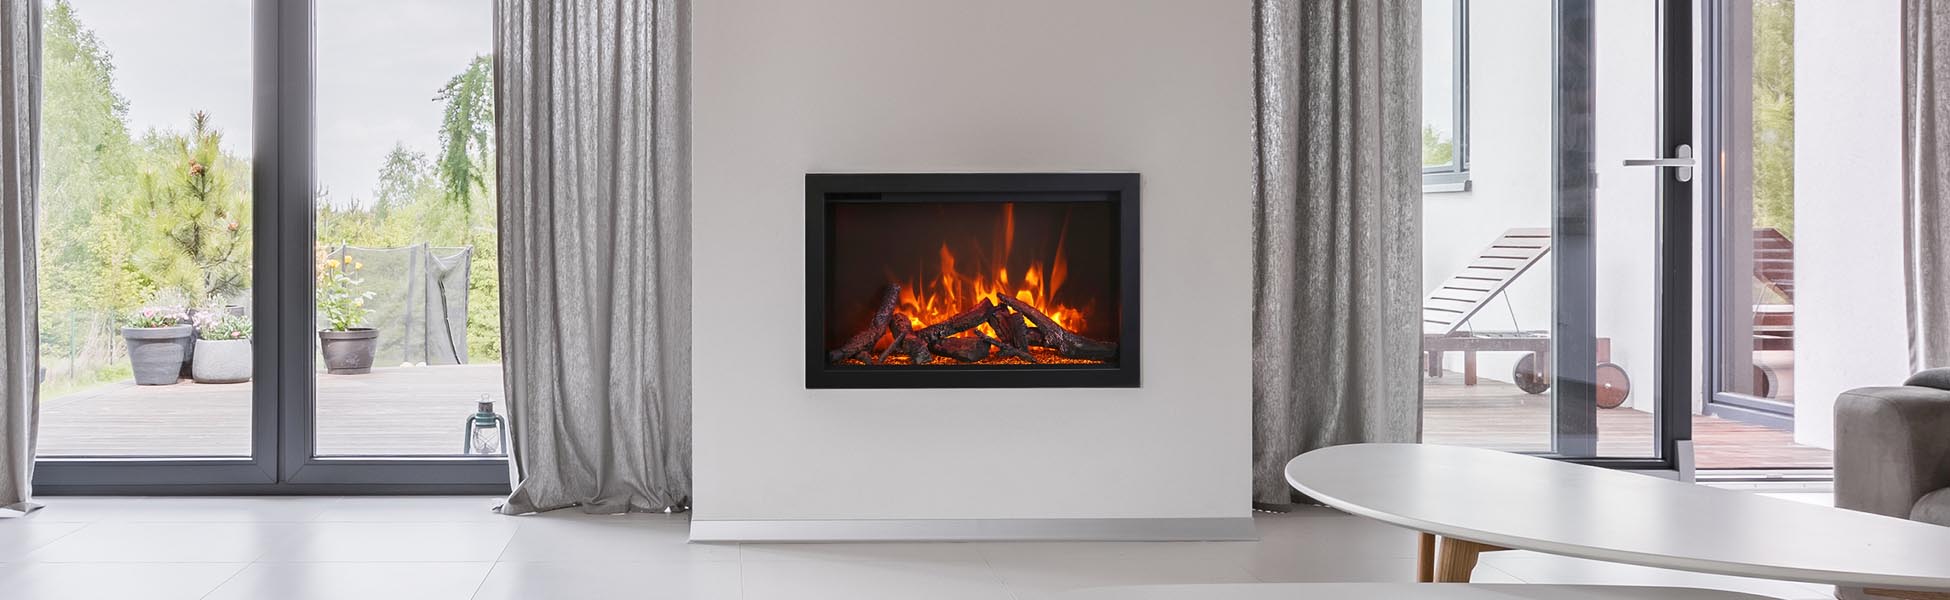 TRD-38 electric fireplace